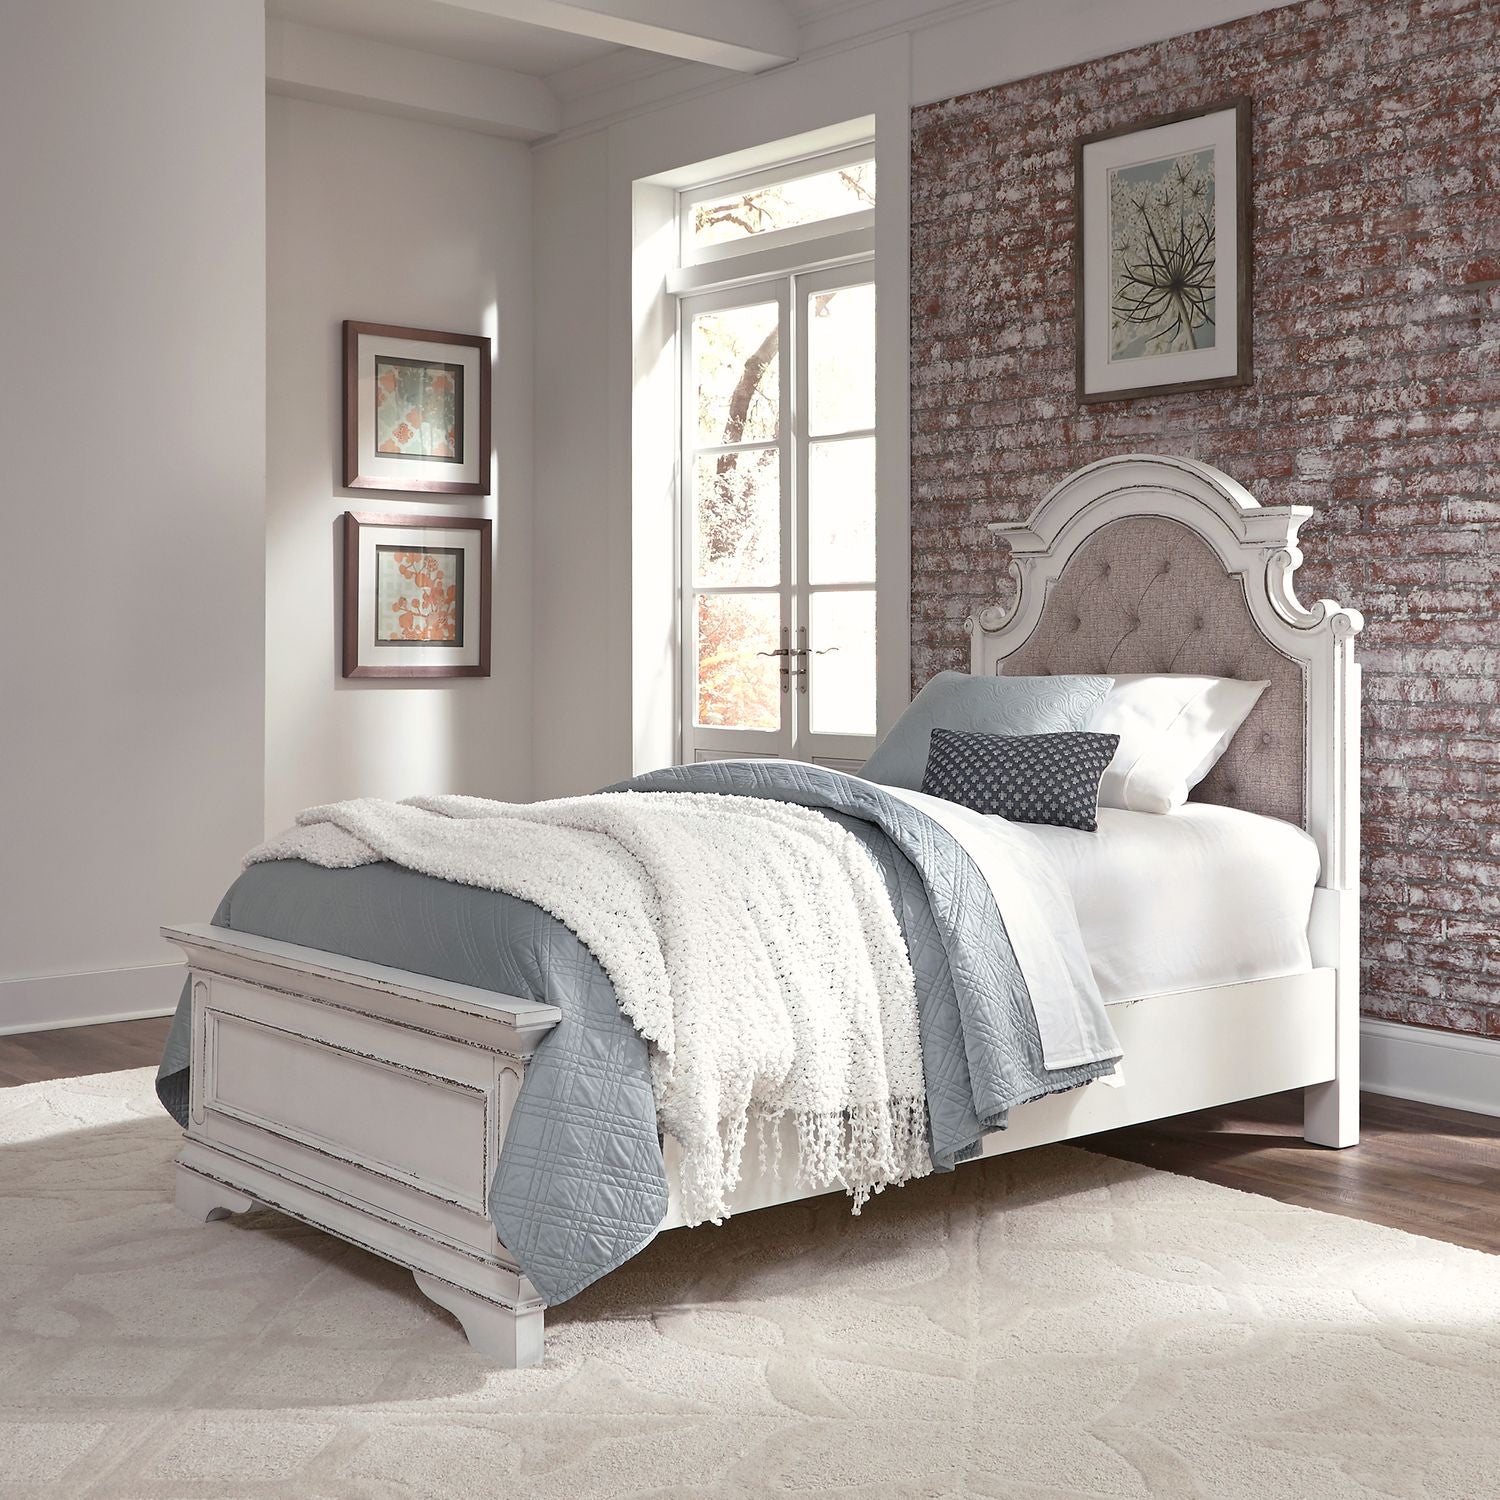 Twin Upholstered Bed - image 1 of 6